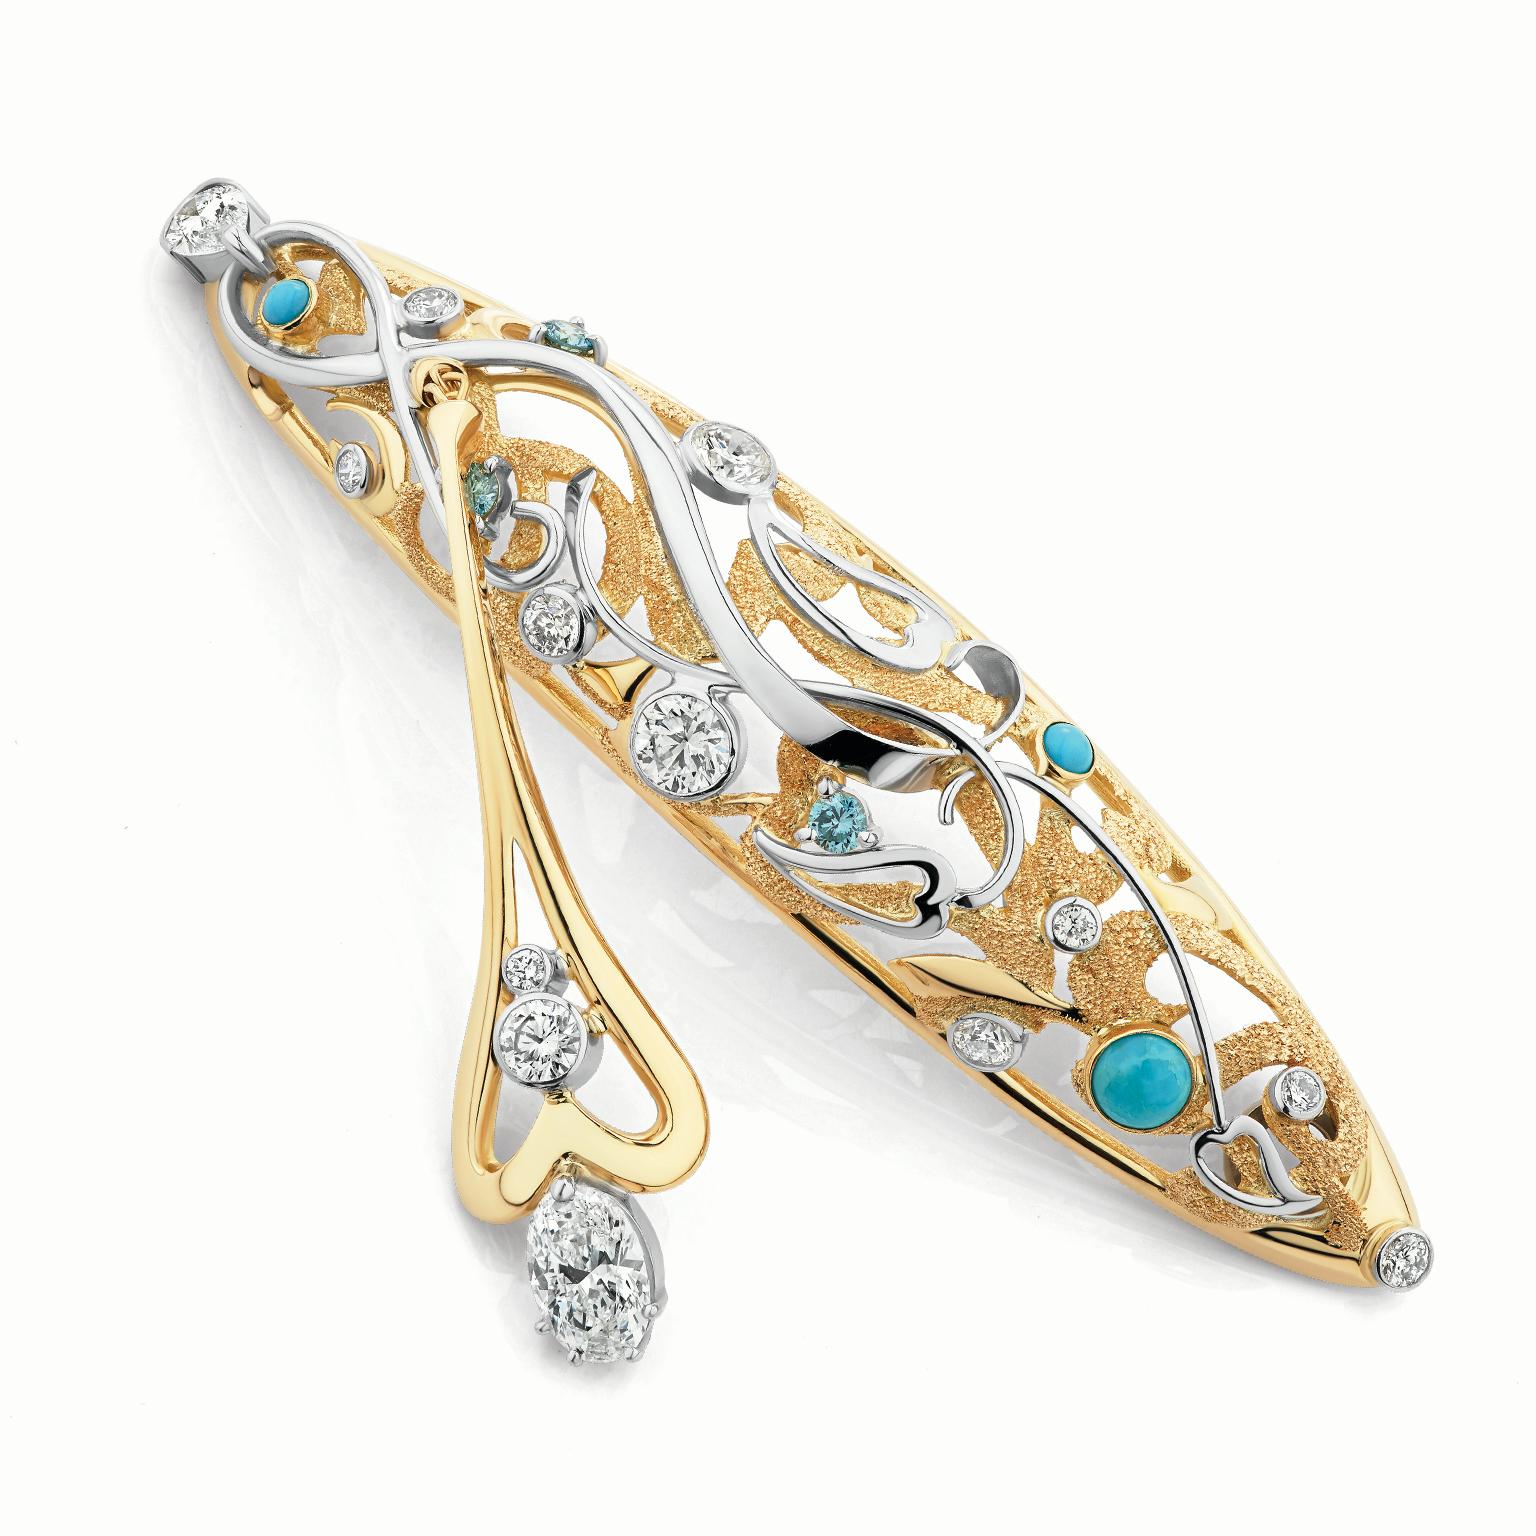 Paul Amey’s “Honeymoon” pendant was crafted from 18K yellow gold and platinum with diamonds and turquoise. The pendant contains an oval 72pt FSI2 diamond GIA Certificate, a 32pt pear shape E/F VS SI1 diamond and a range of round white E/F VS SI1